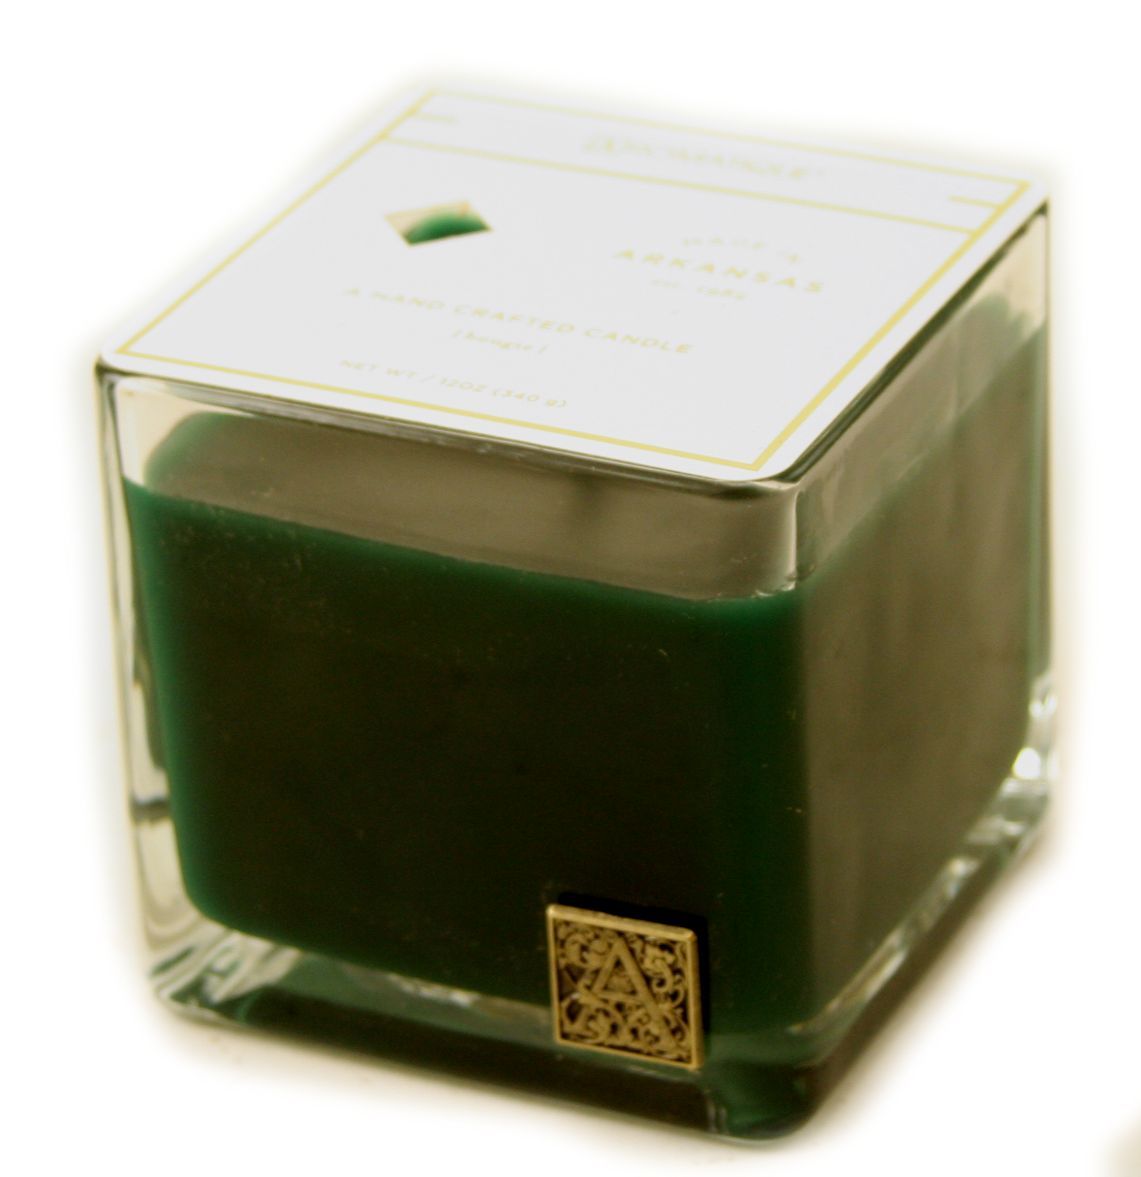 SMELL OF GARDENIA Aromatique Cube 12 oz Glass Scented Jar Candle